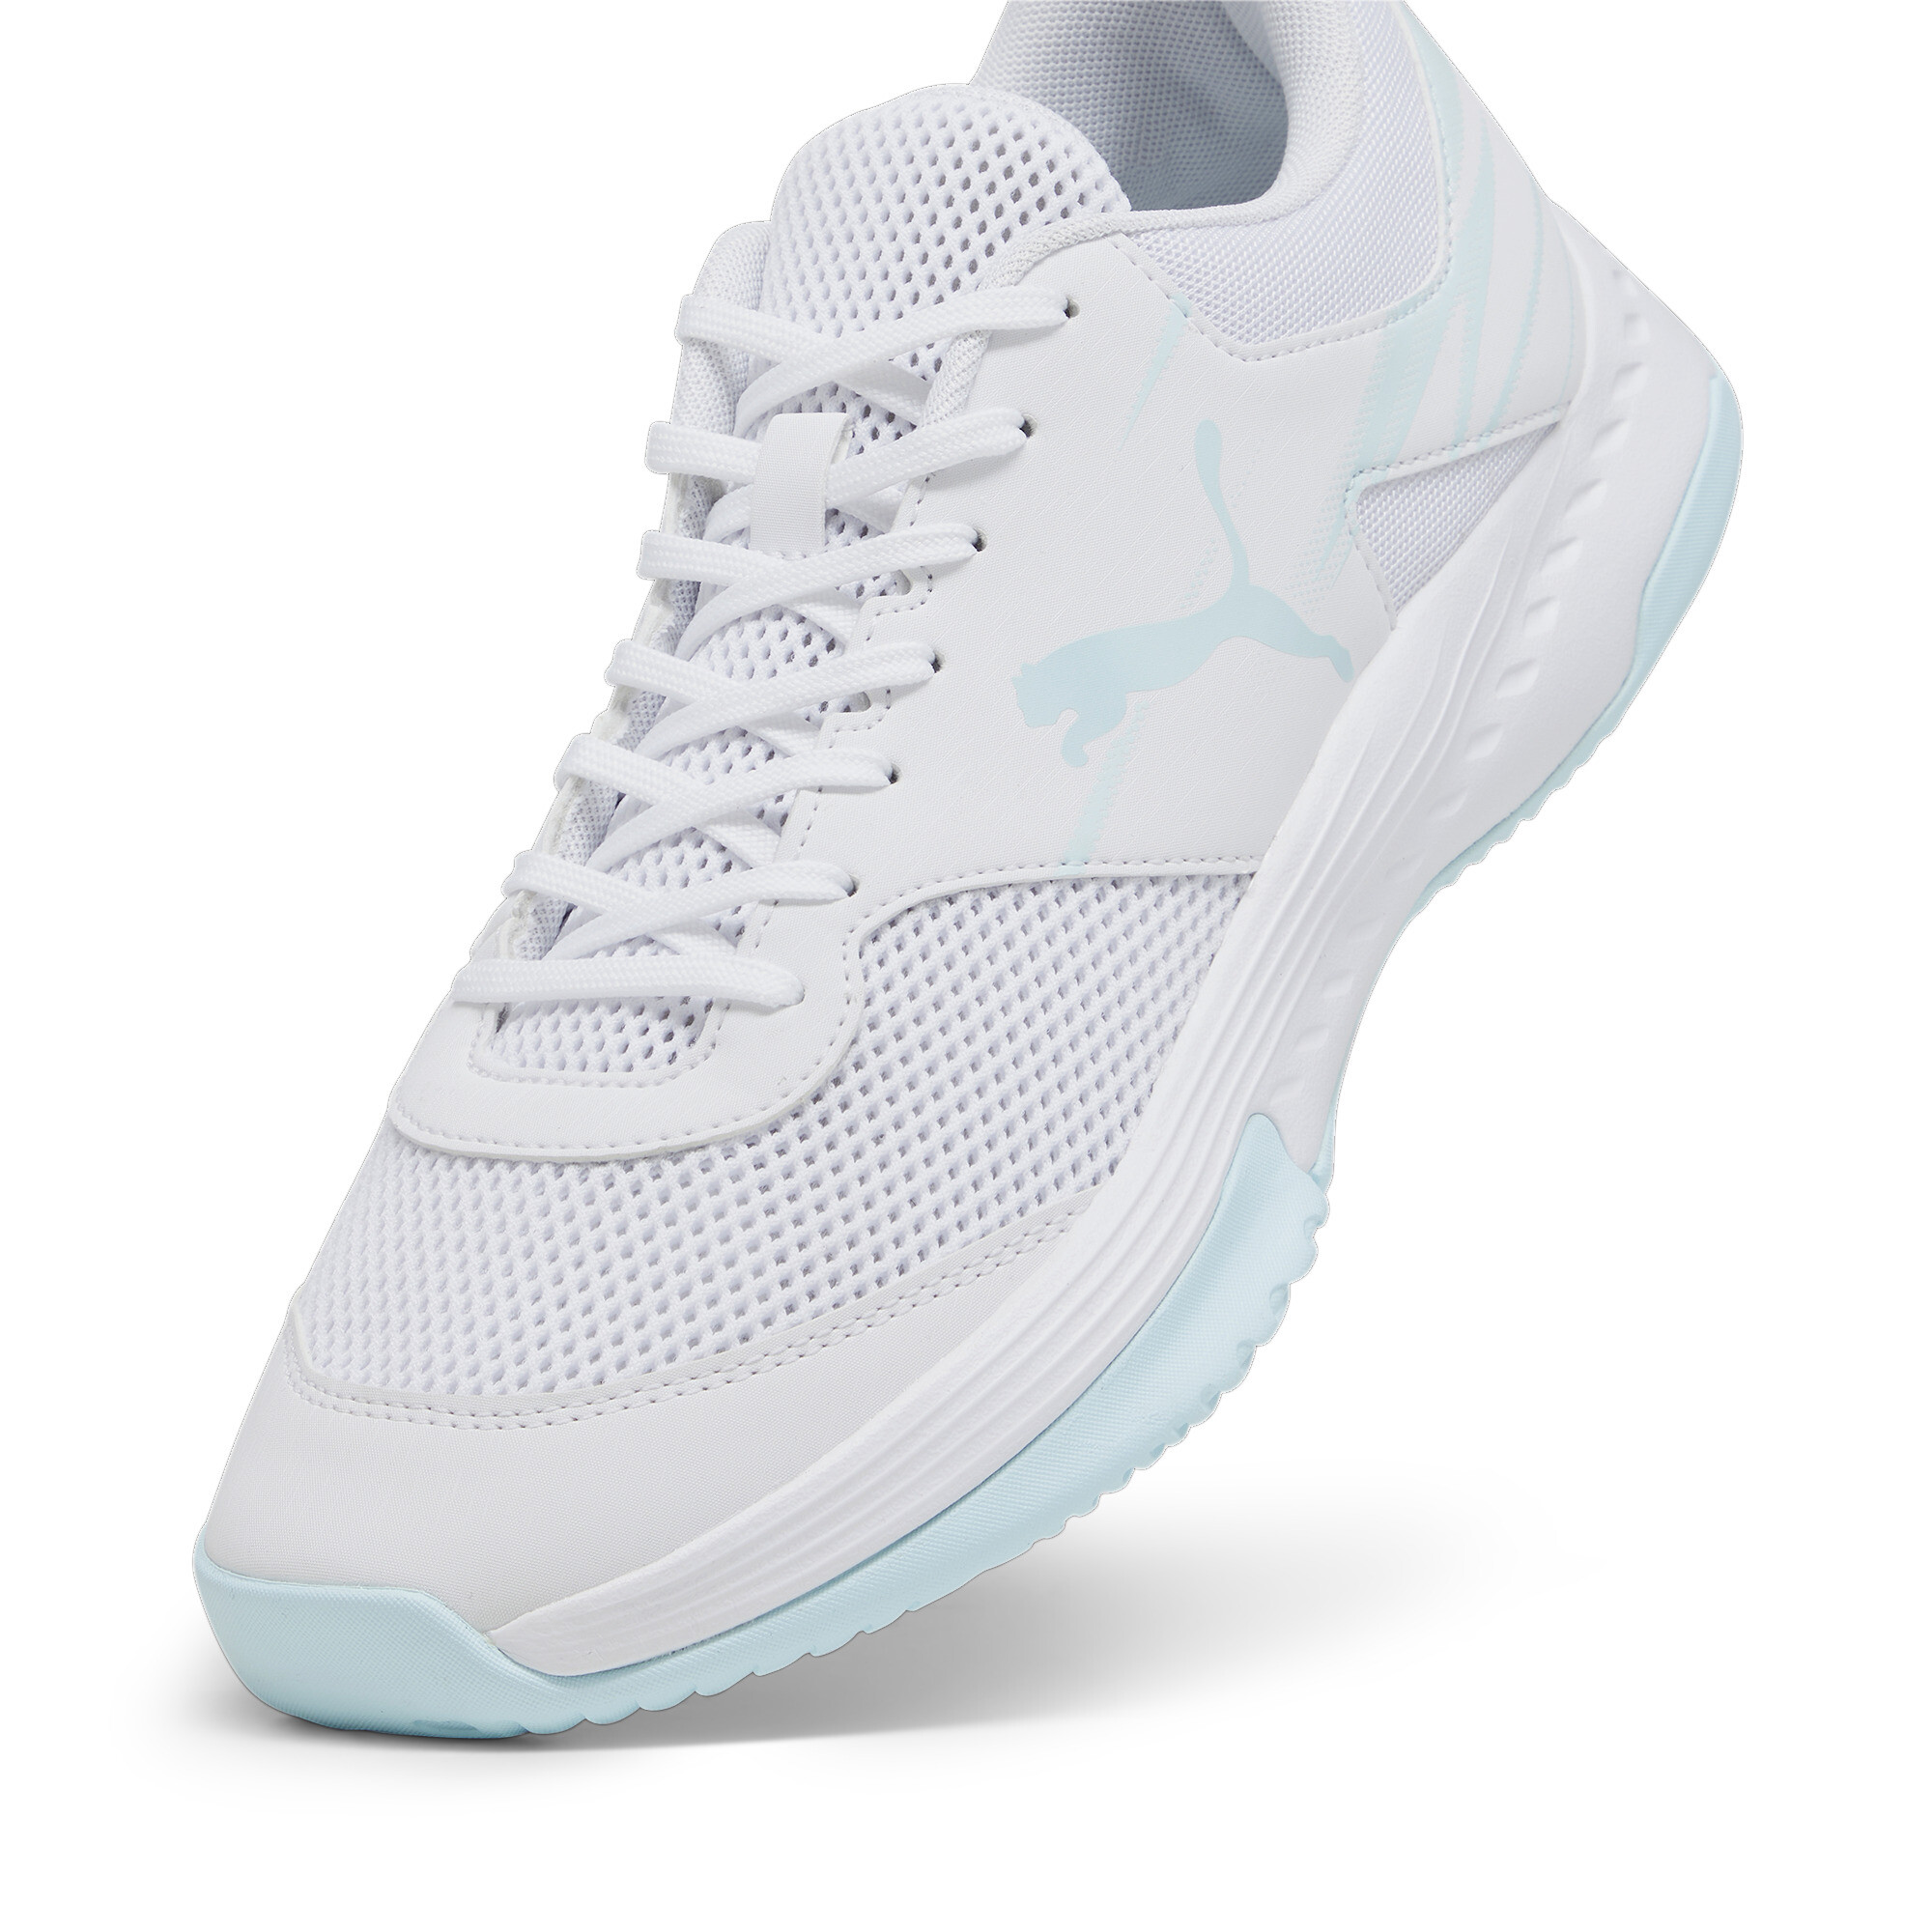 Puma Varion II Indoor Sports Shoes, White, Size 35.5, Shoes